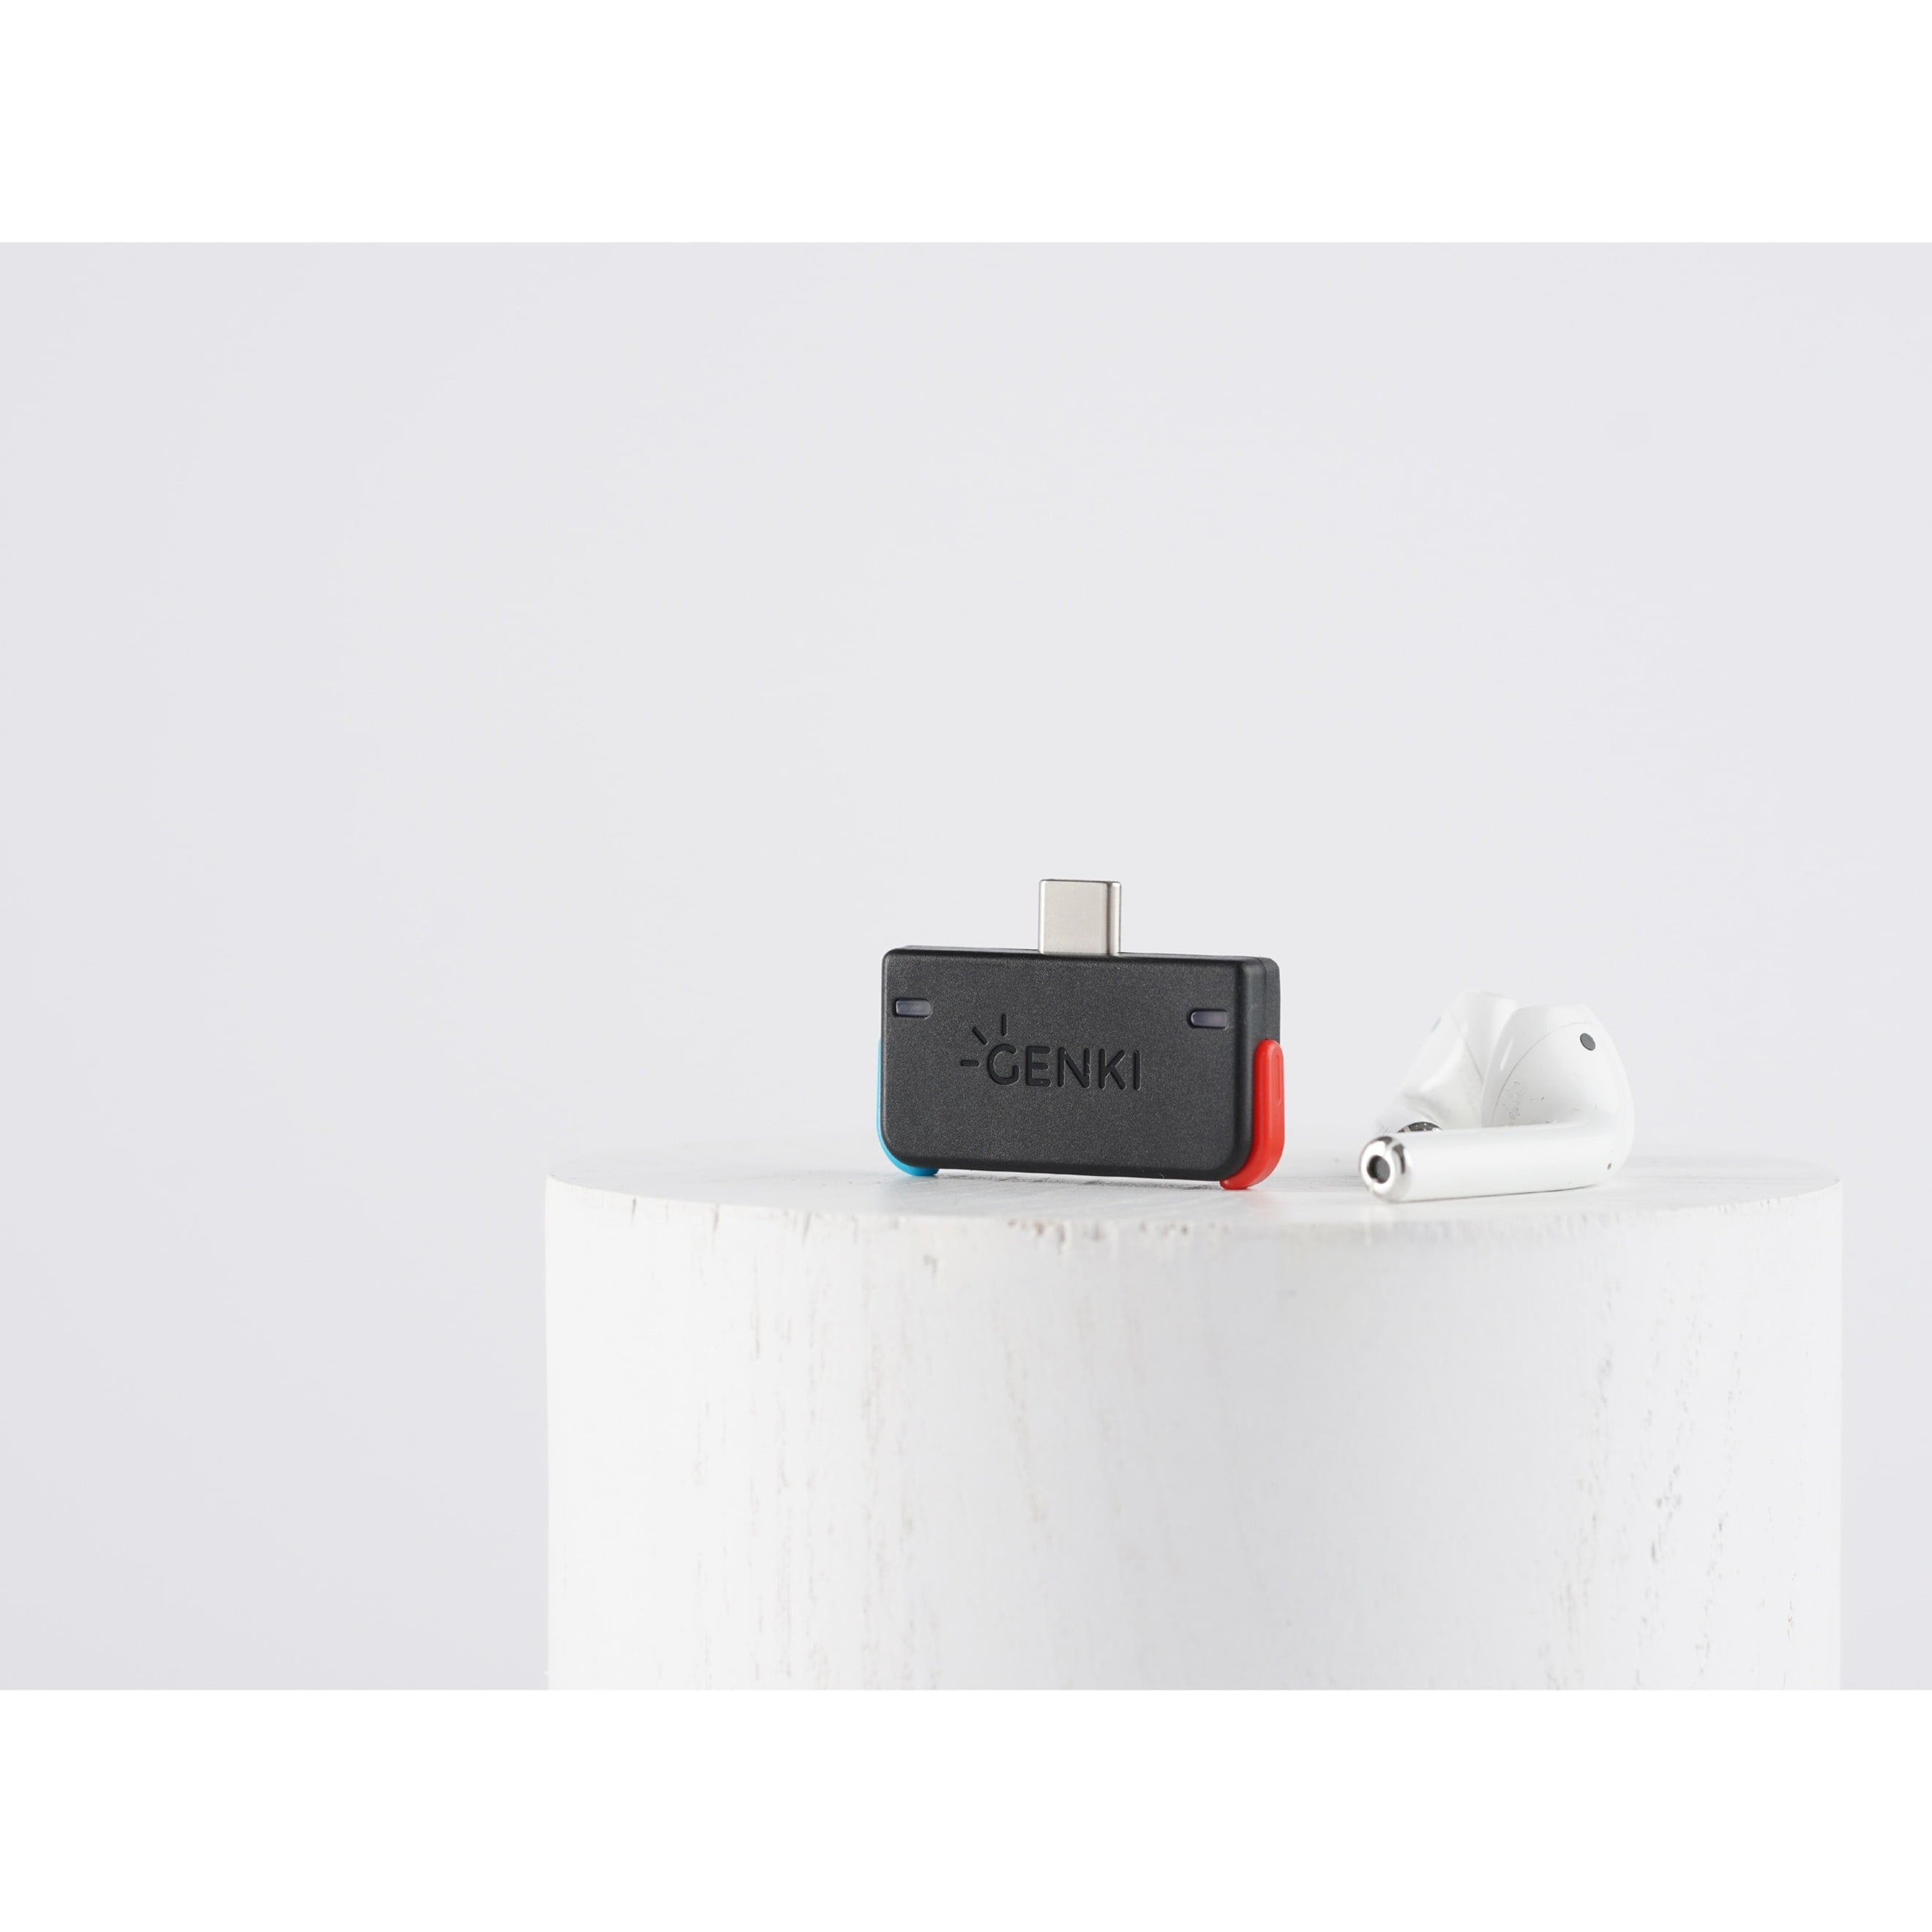 Genki Bluetooth Audio Adapter for Switch, and Neon -